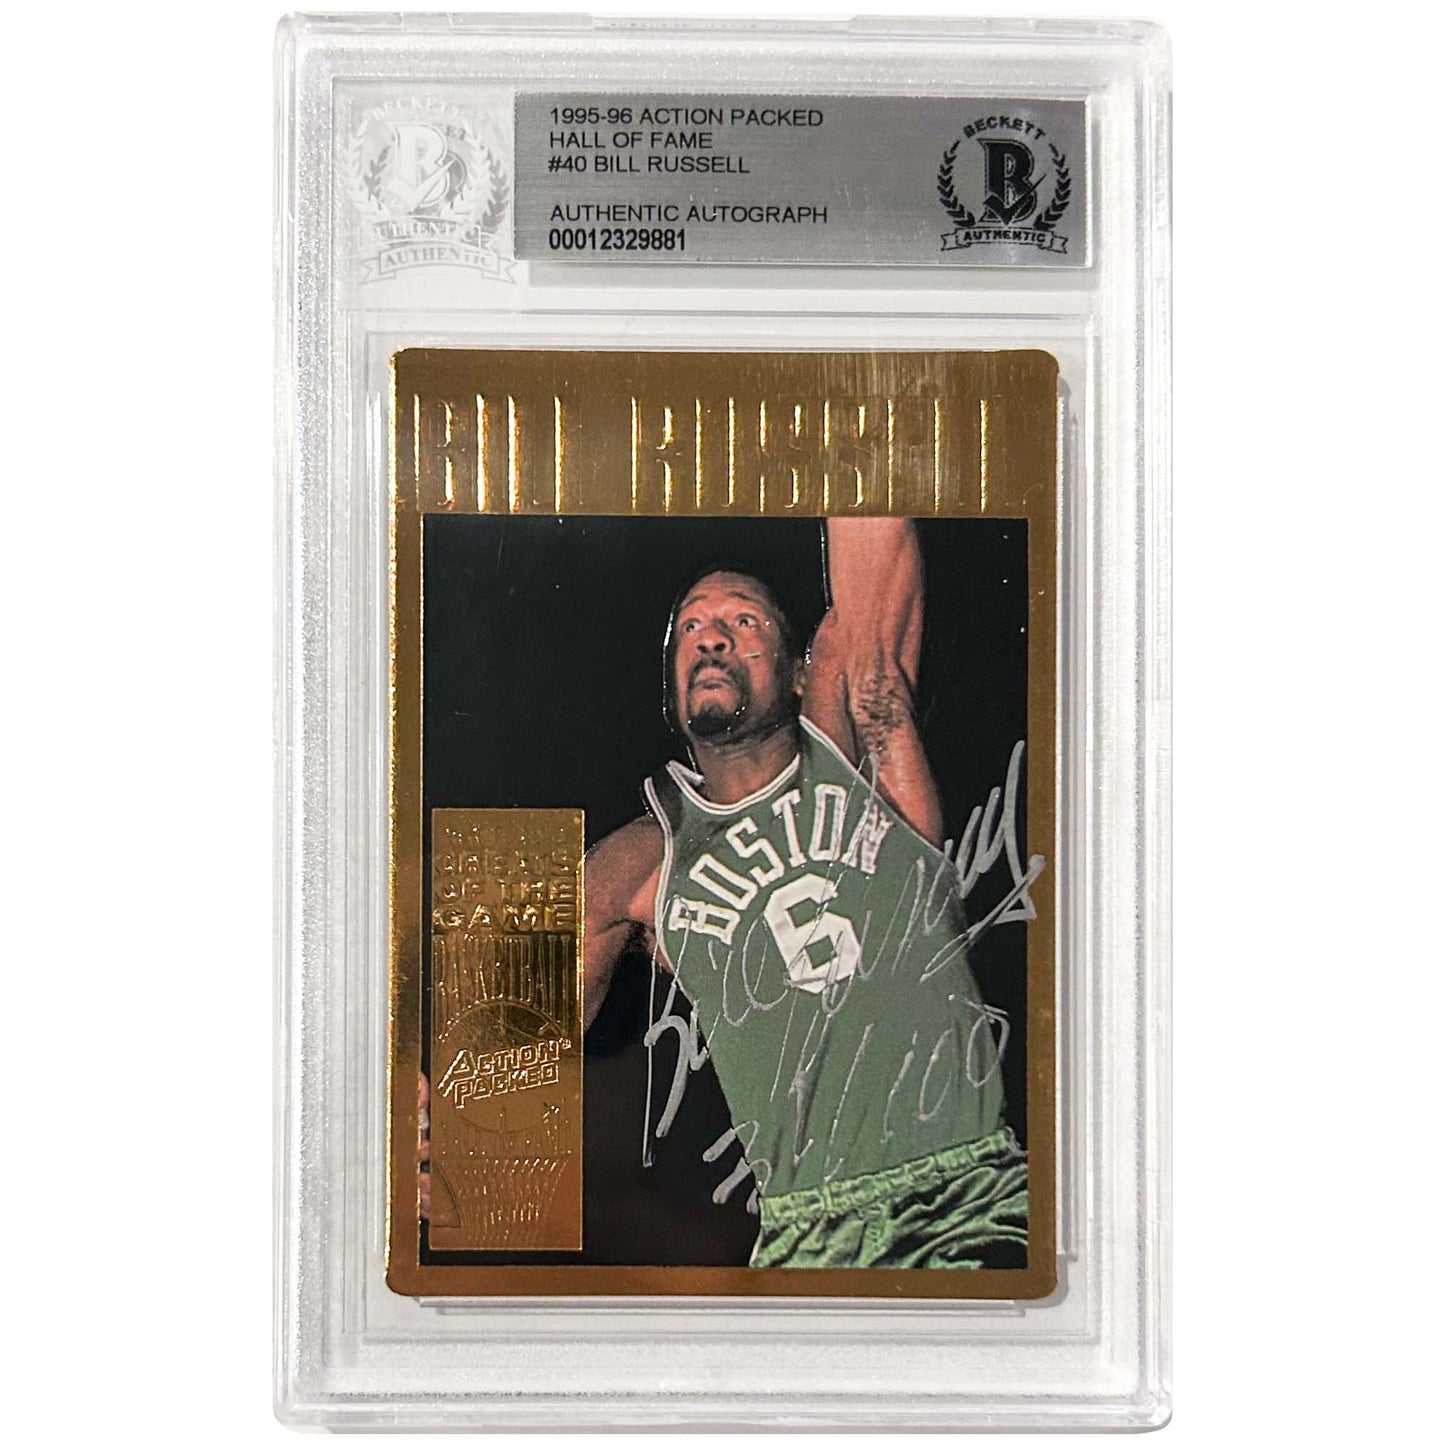 Beckett Authentic - #40 Bill Russell Action Packed Hall of Fame Card Zoomed Out View